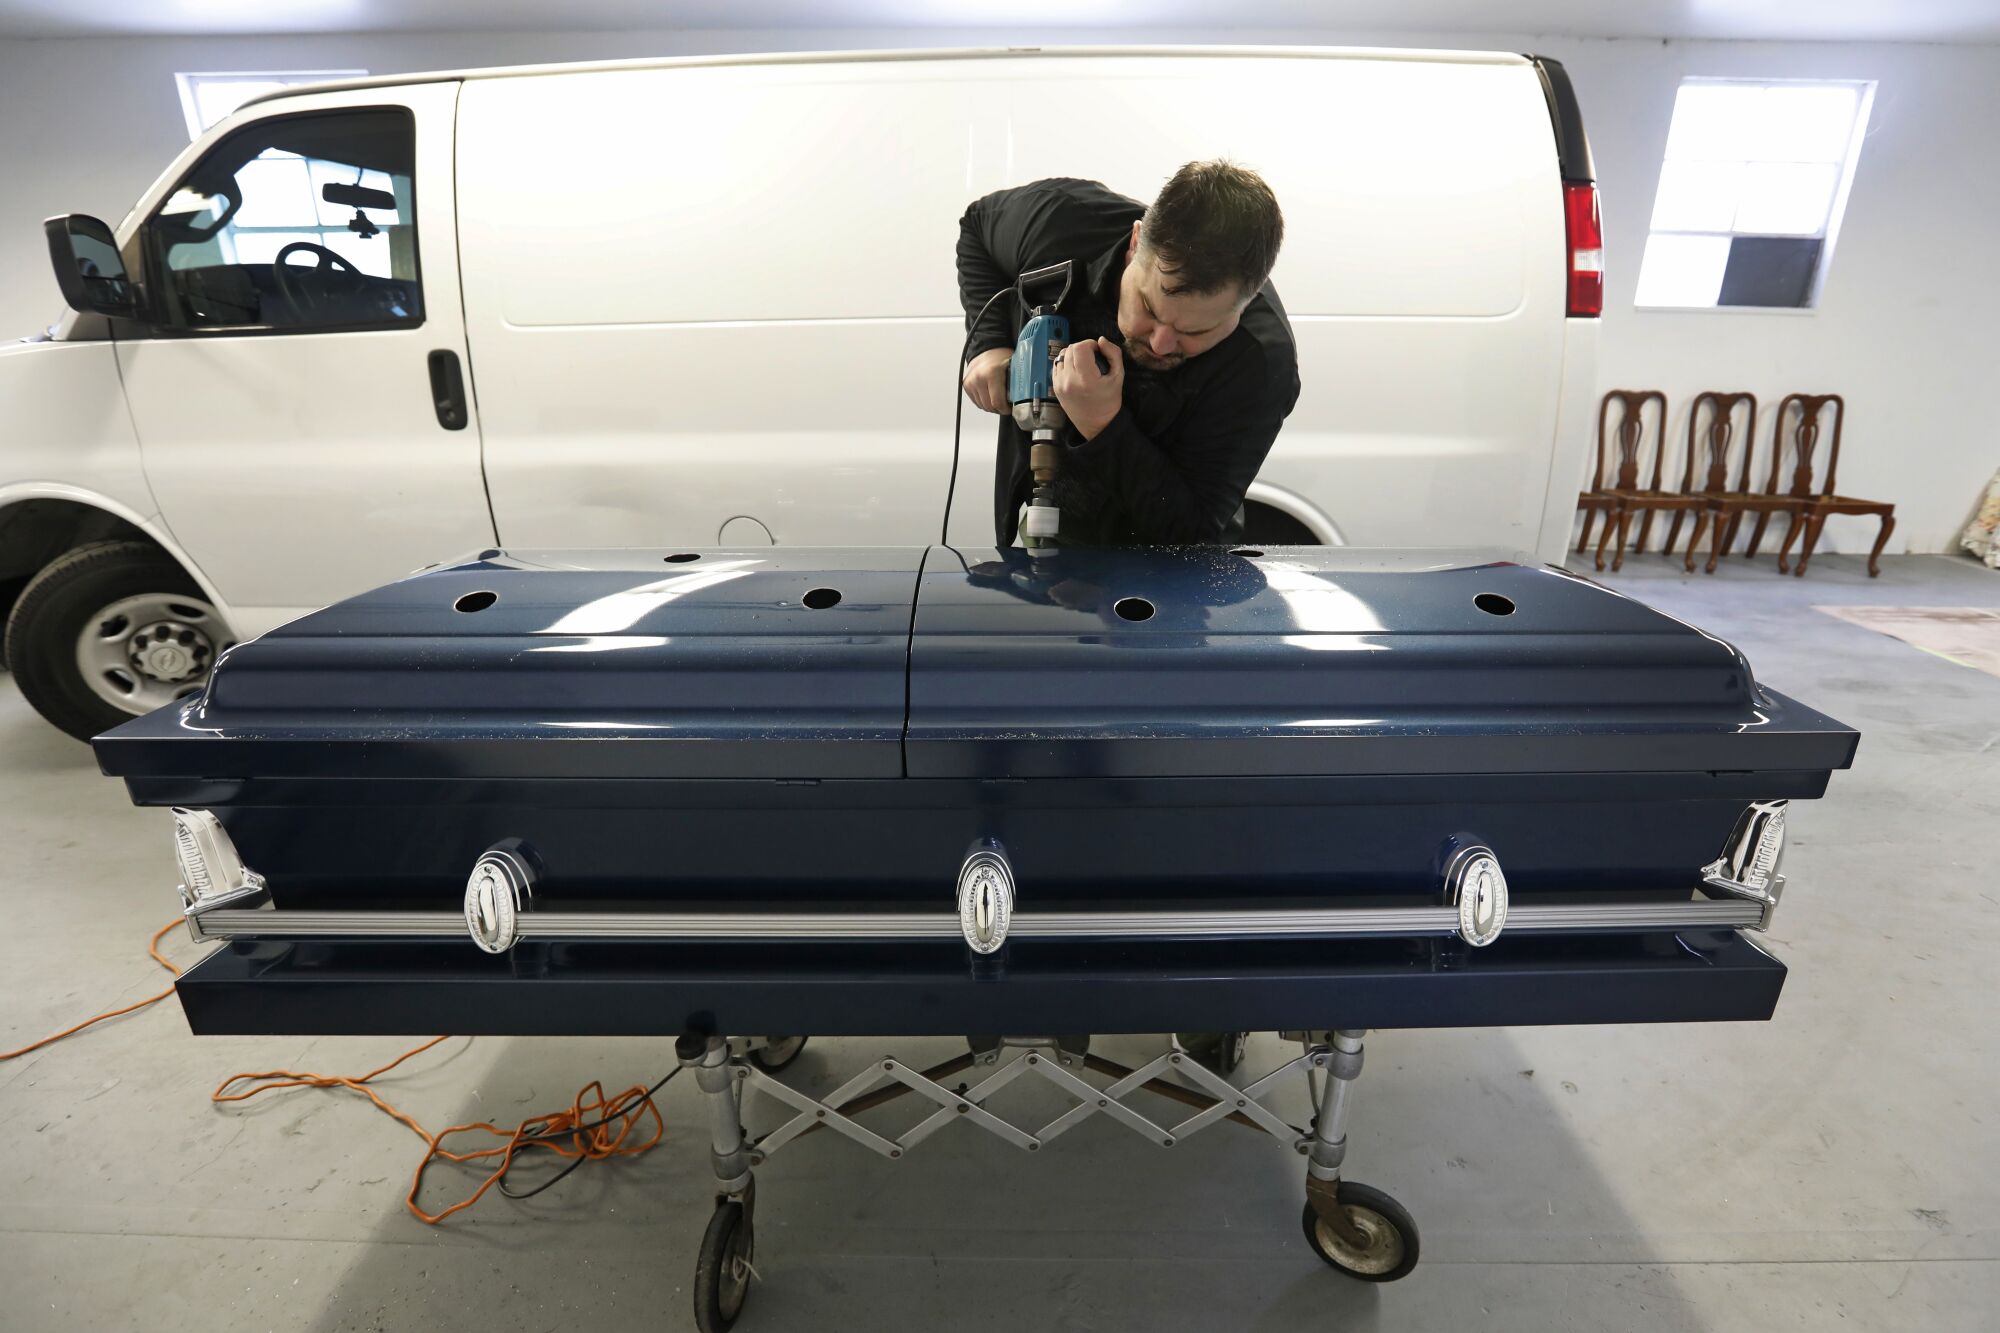 Funeral director Ken McKenzie prepares a casket by drilling holes in the aluminum and removing the inside dressings.